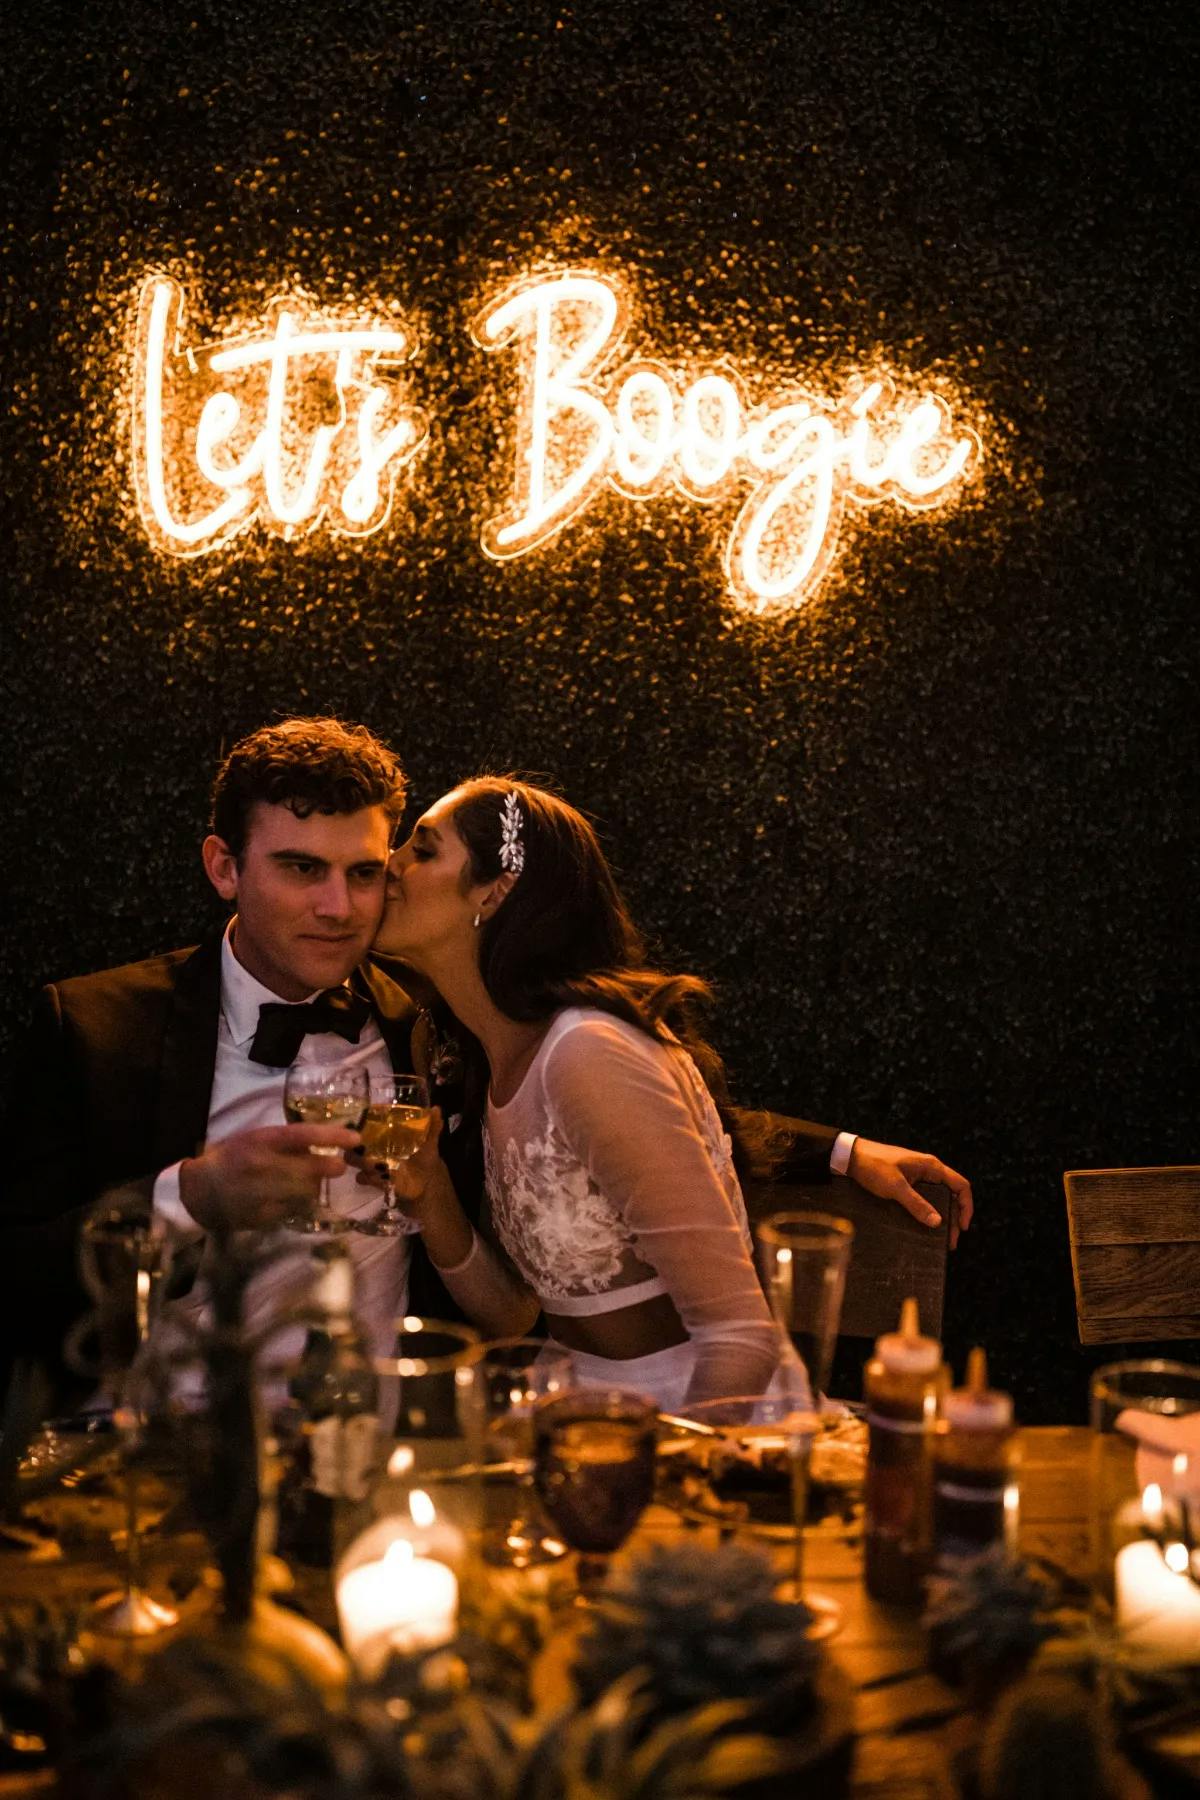 A couple sits closely at a dimly lit wedding reception. The woman kisses the man's cheek while he holds a glass. Behind them, a neon sign reads "Let's Boogie." The table is set with wine glasses, condiments, and decor. The ambiance is warm and festive.